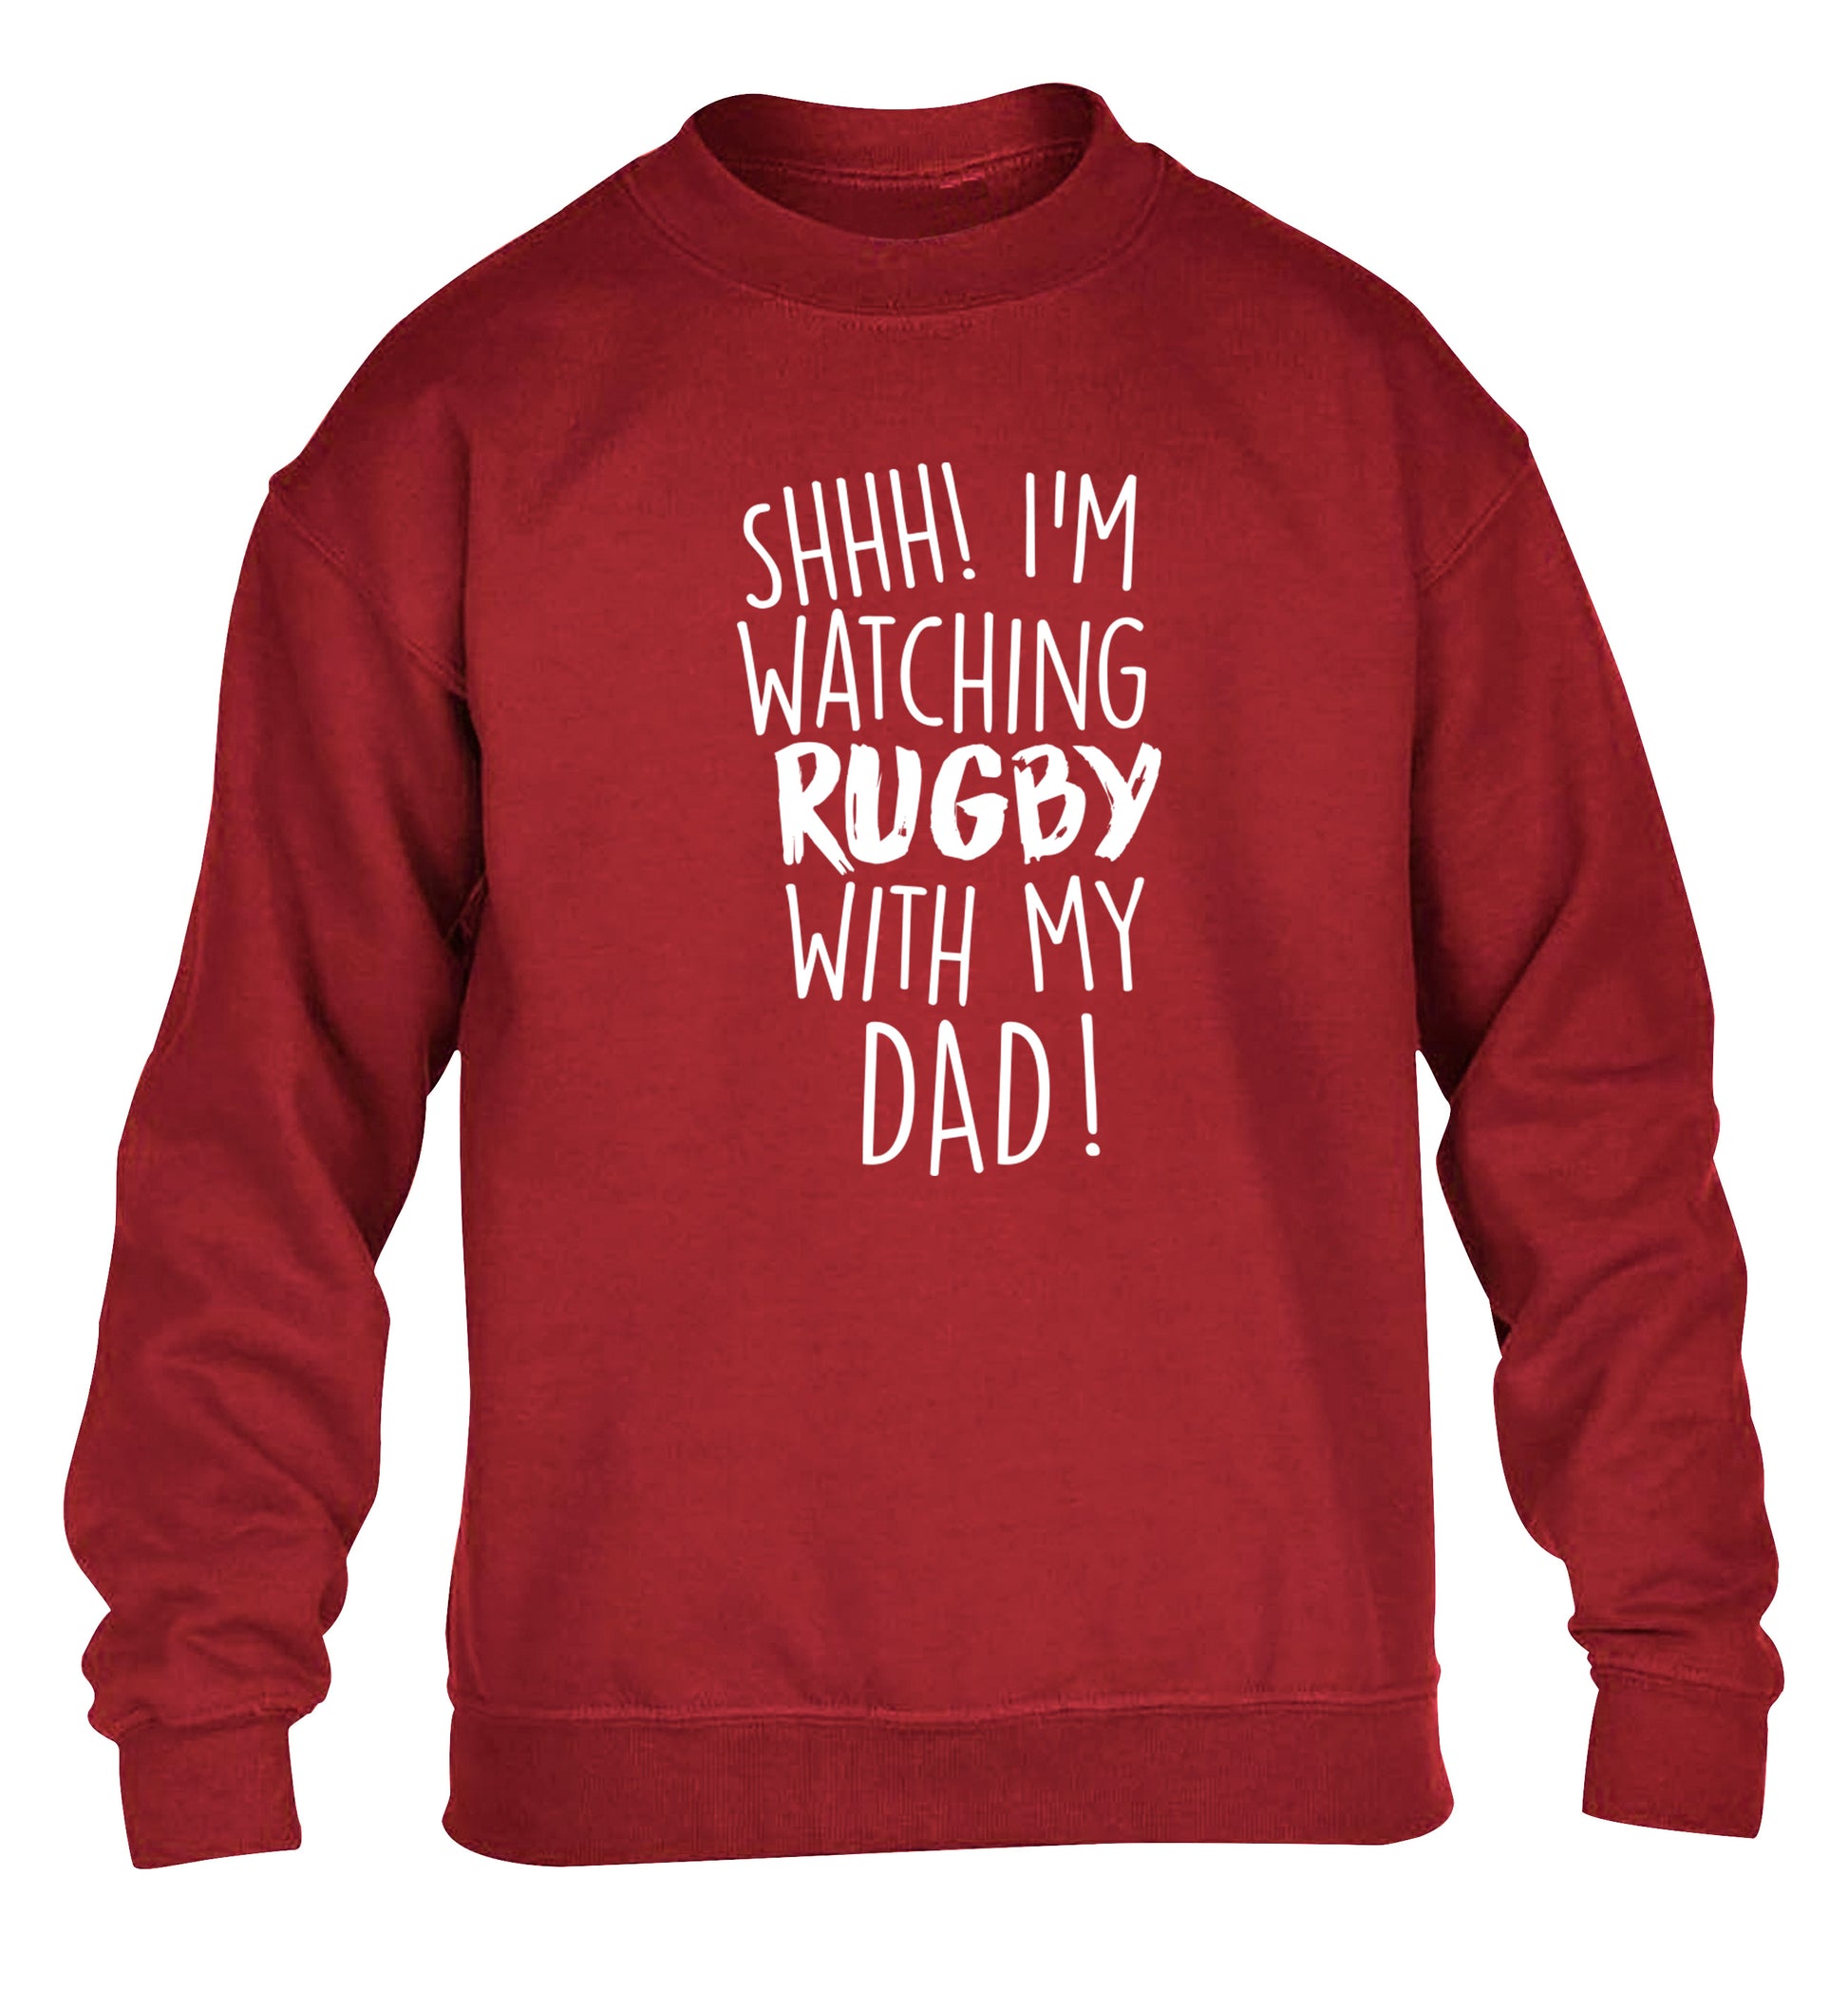 Shh... I'm watching rugby with my dad children's grey sweater 12-13 Years